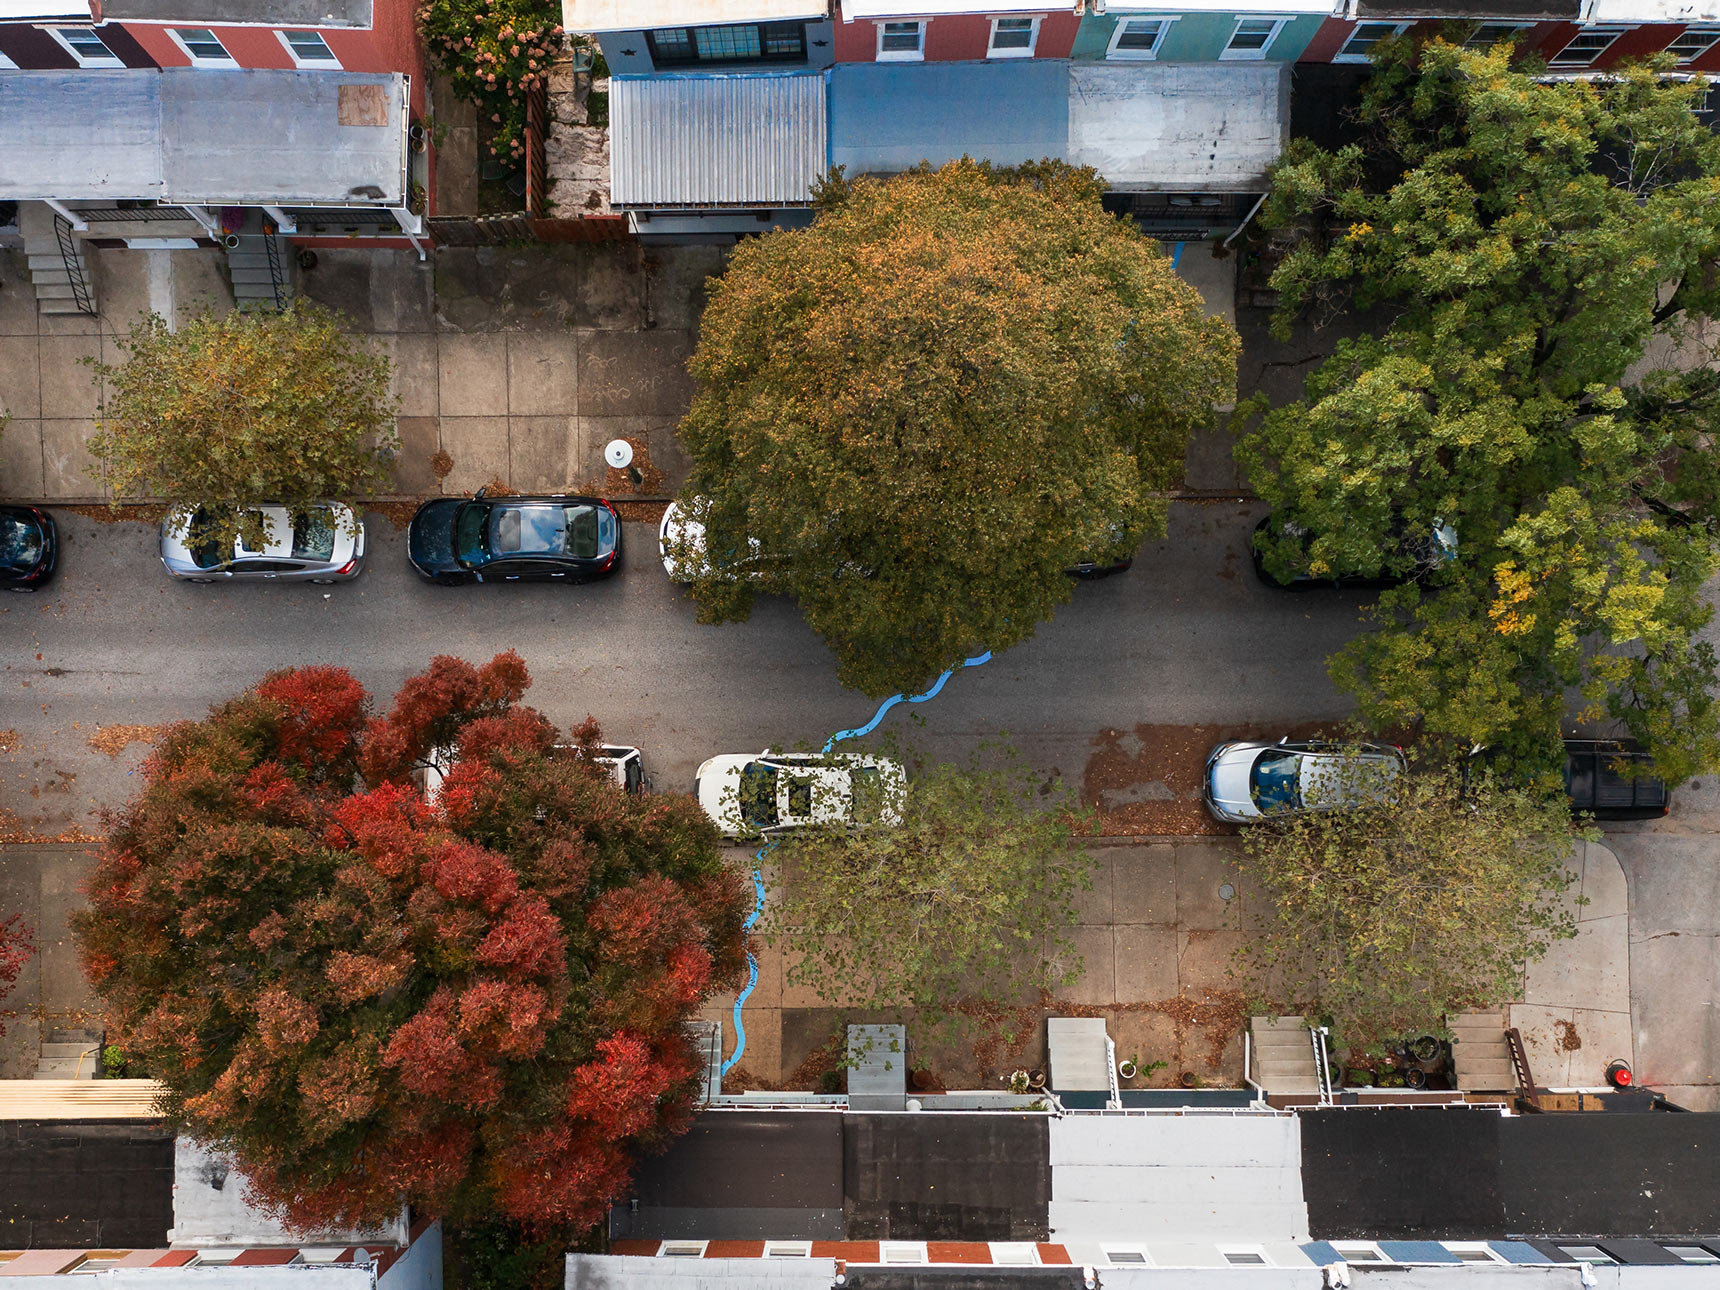 Aerial photo of a public art installation mapping the path of an underground stream. A bright blue wavy line snakes all the way across a roadway and sidewalks between two blocks of Baltimore rowhouses. Red and orange trees show fall colors.